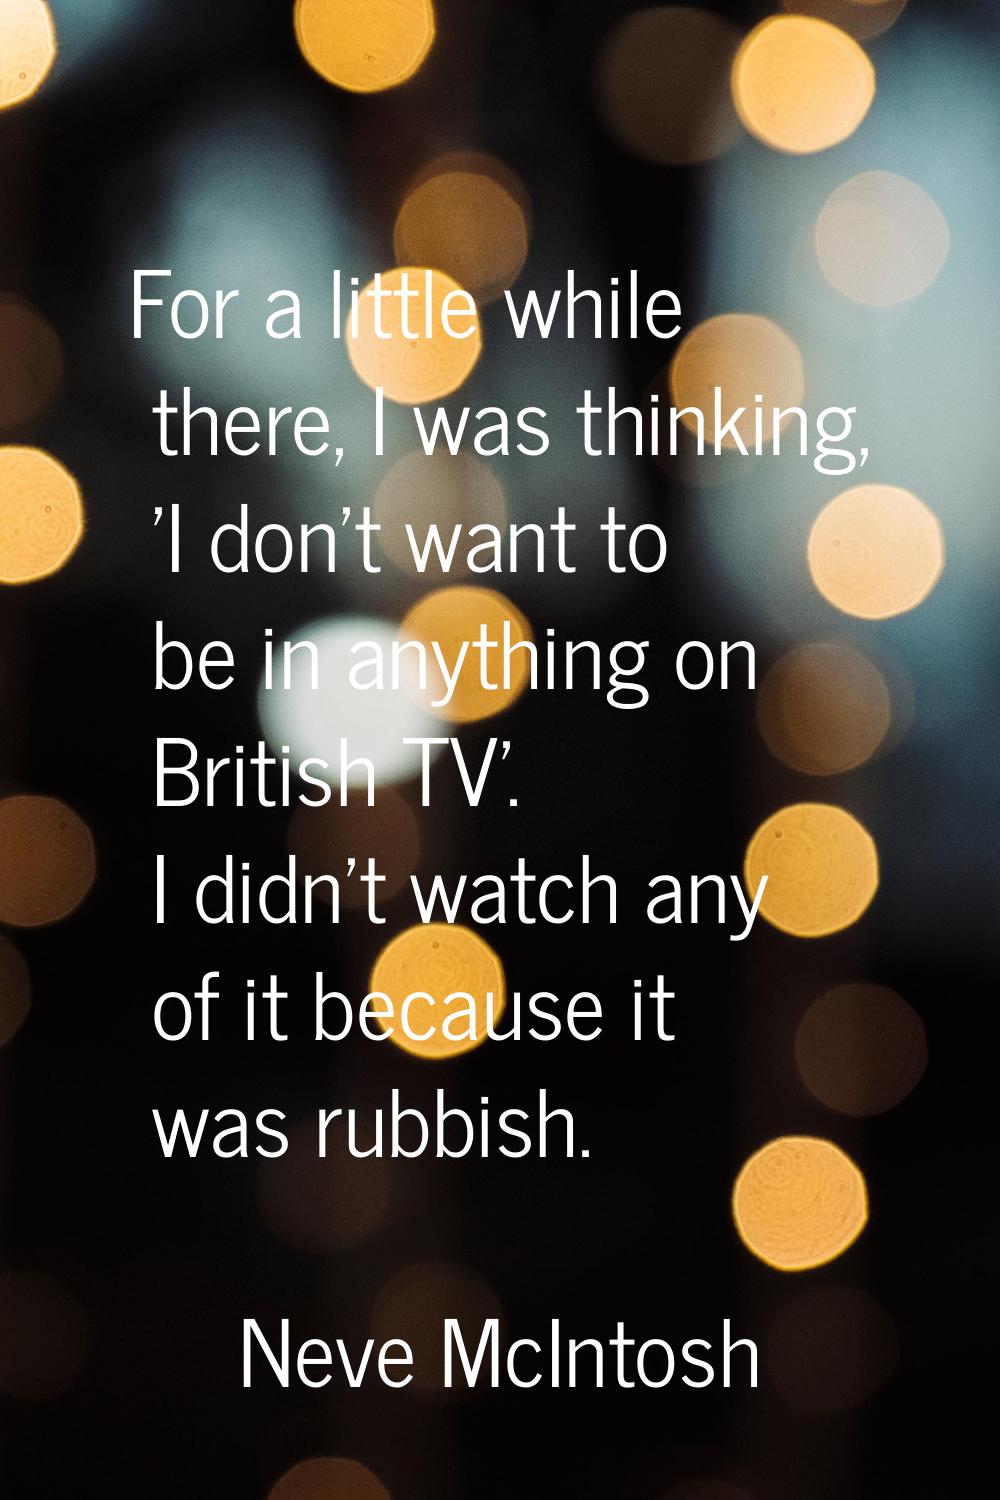 For a little while there, I was thinking, 'I don't want to be in anything on British TV'. I didn't 